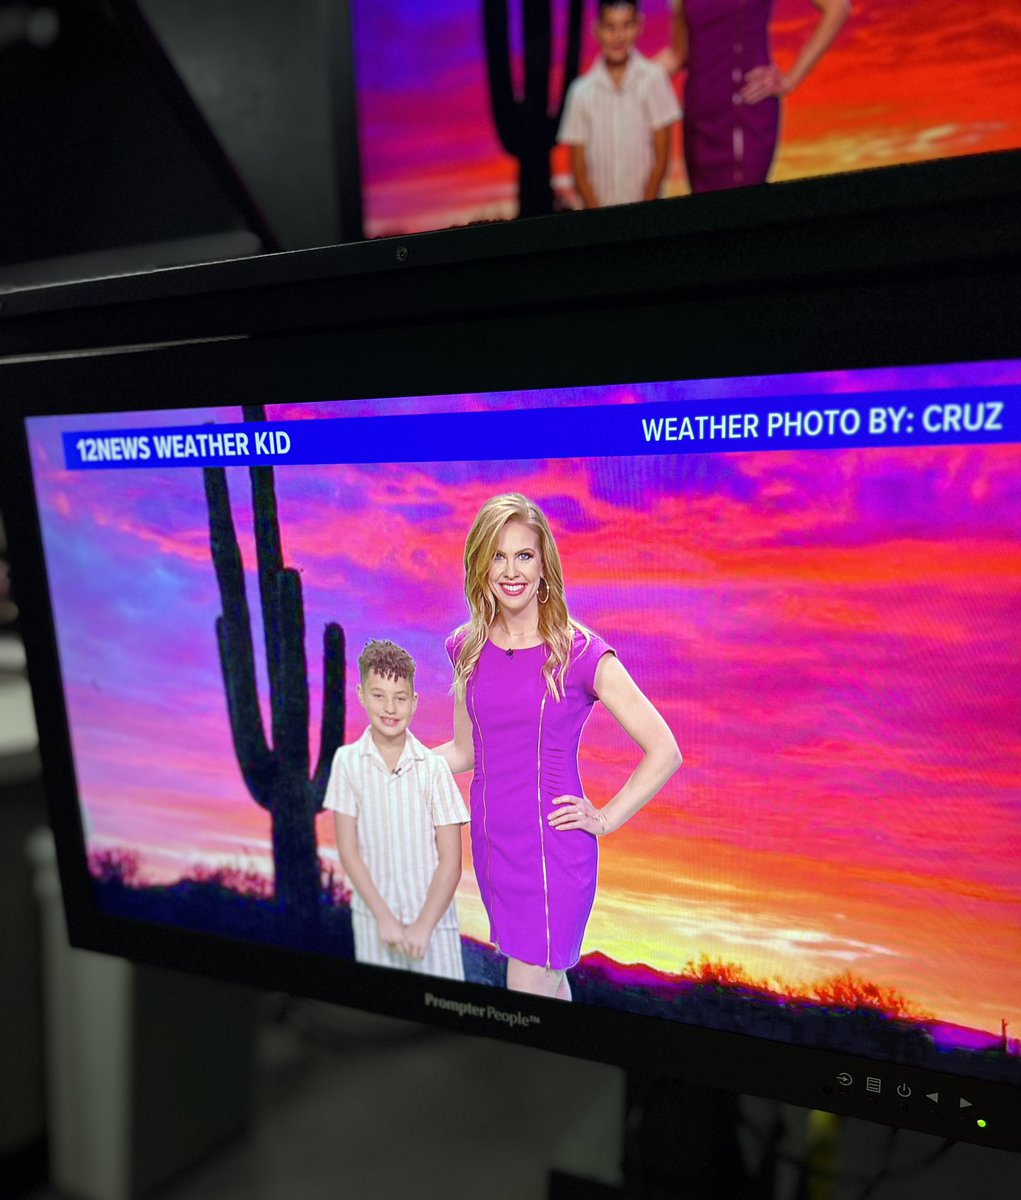 Cruz plays baseball, basketball & football but today his game is weather! He’s this week’s 12News Weather Kid! 🤩 #azwx #beon12